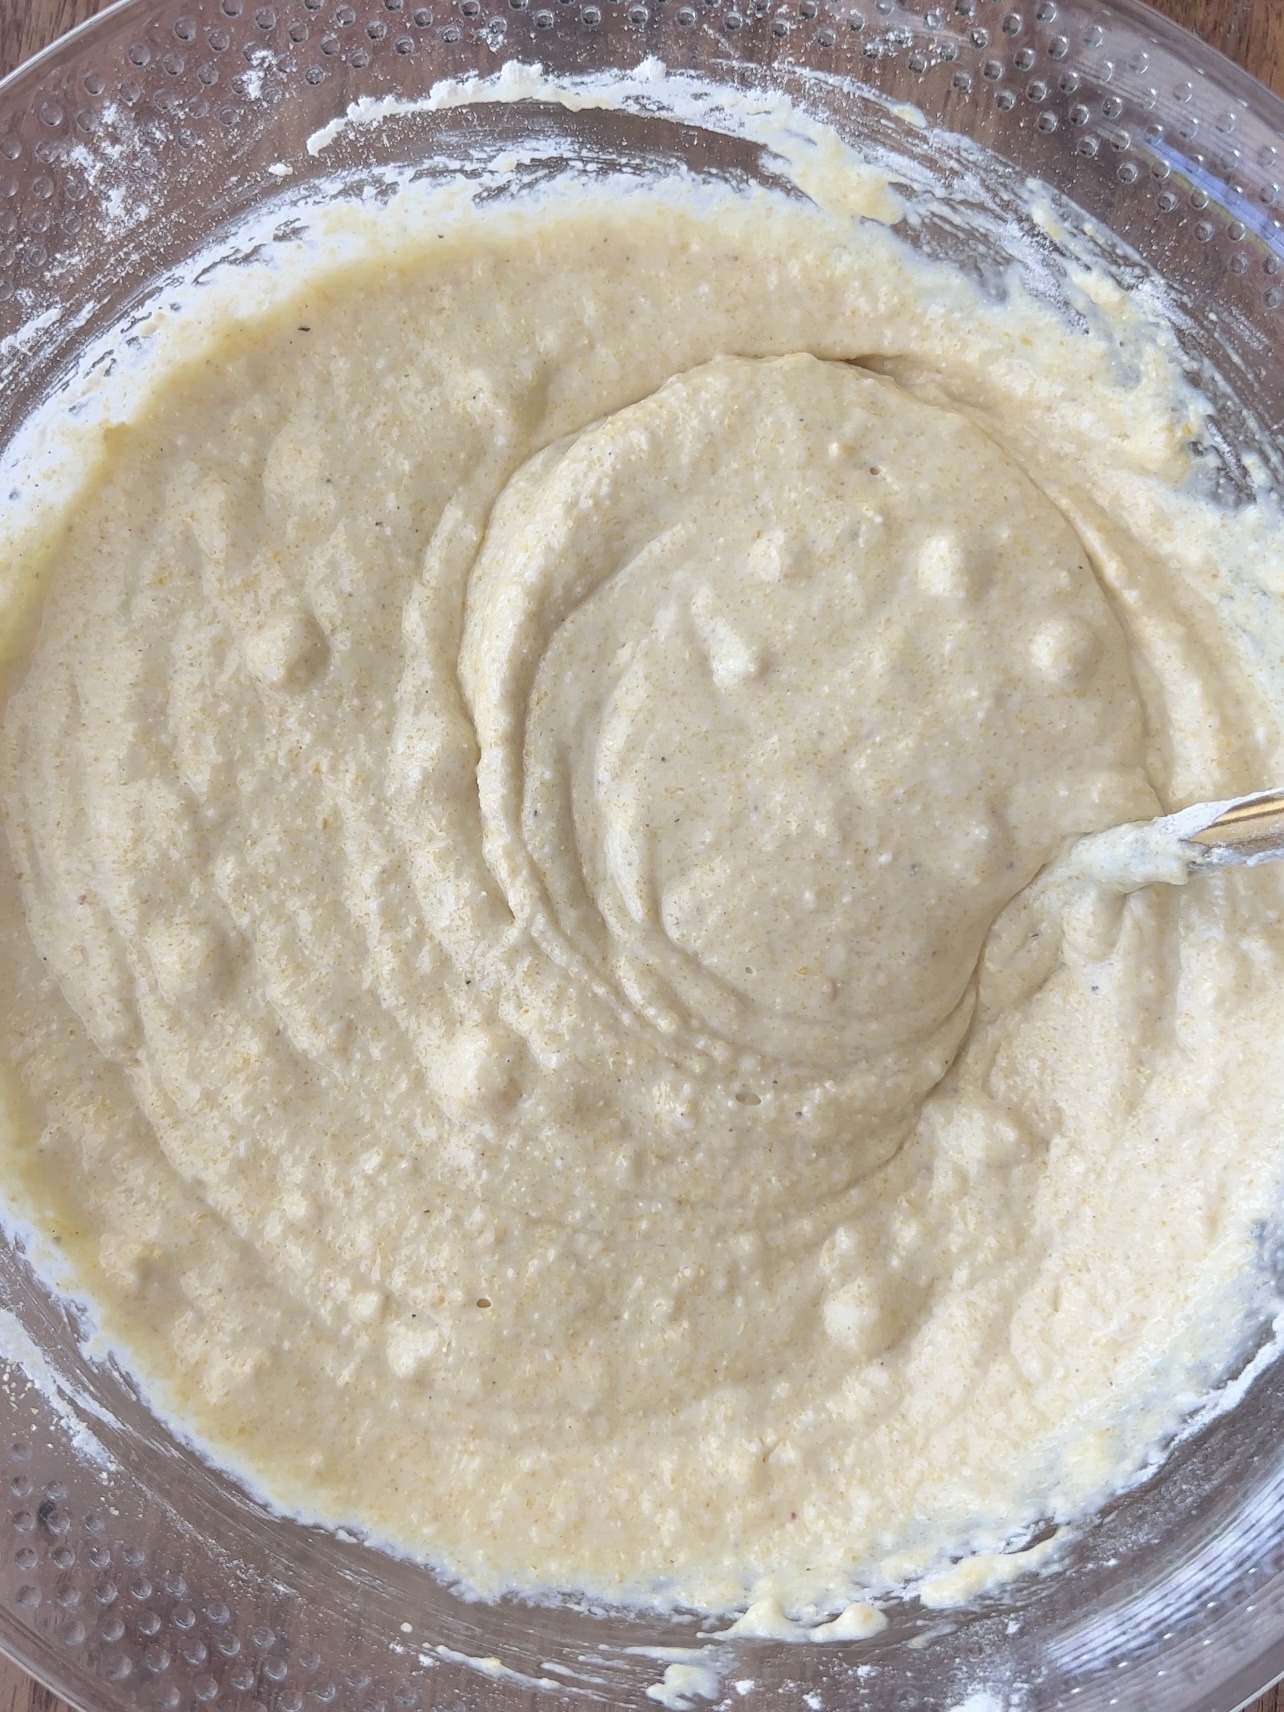 Step 2: Add the corn and mix. Then, add the cornmeal and regular or gluten free all purpose flour. Mix until a thick batter forms.